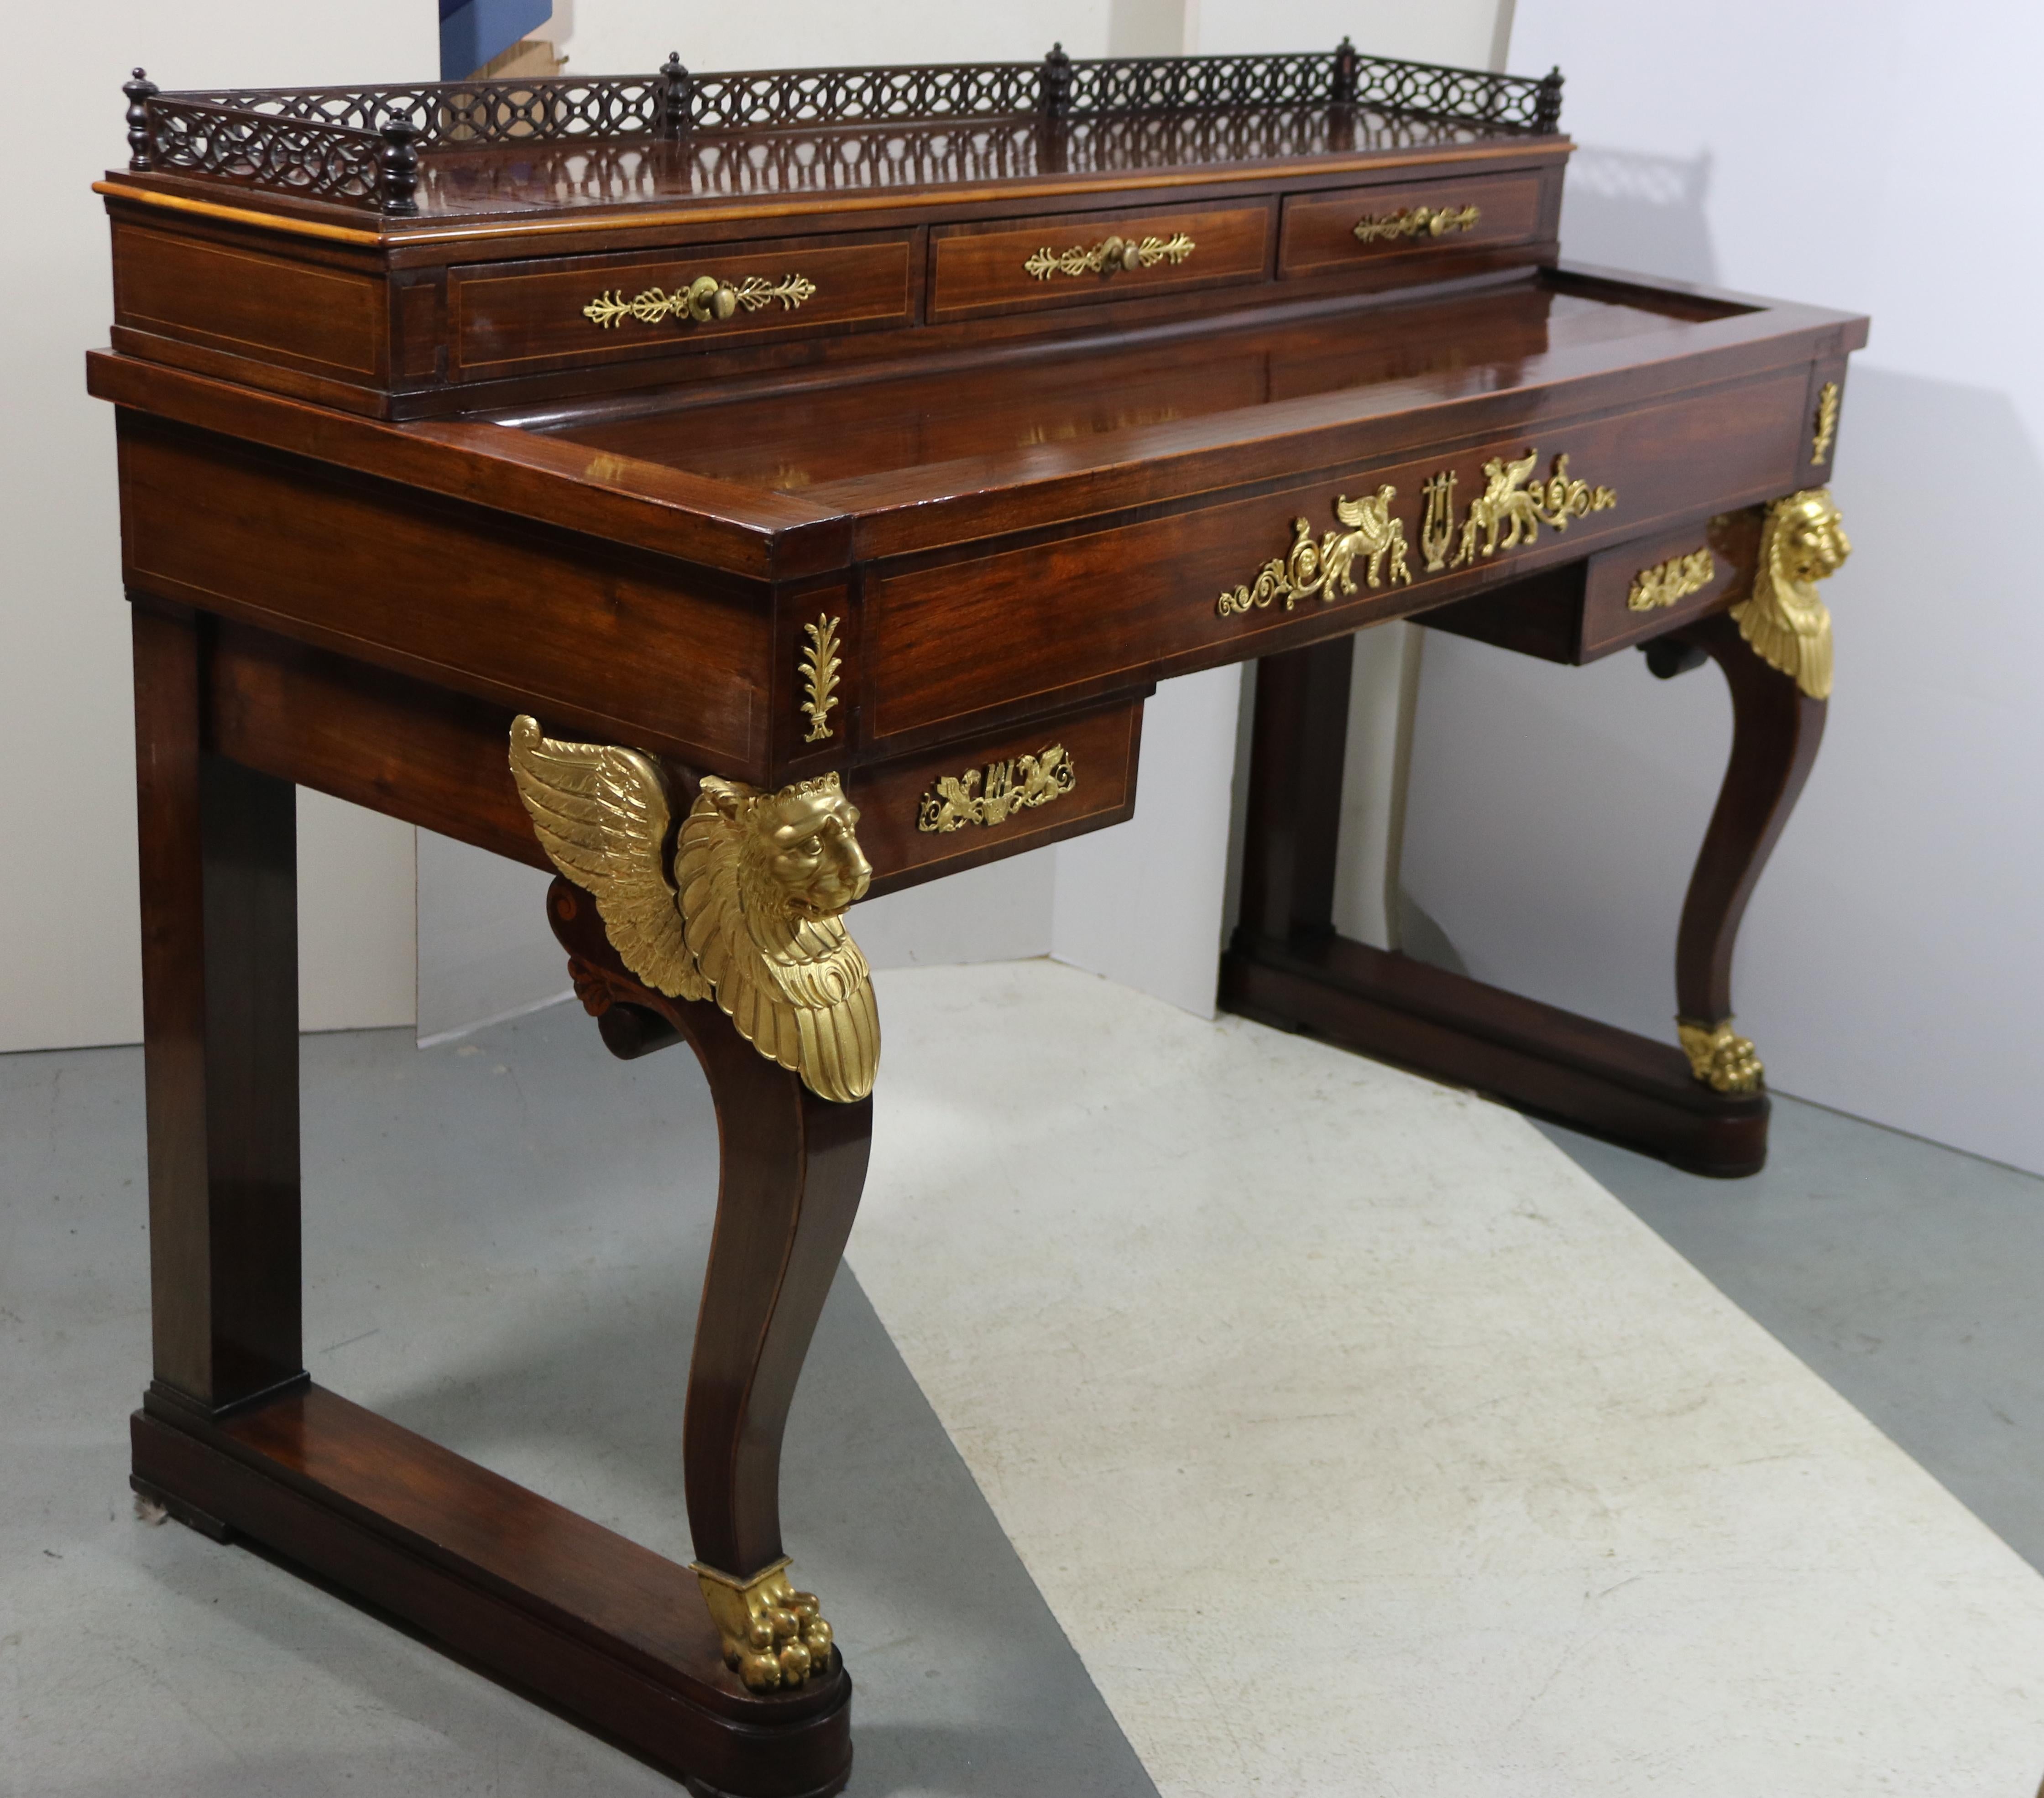 1790-French Empire Writing Desk Secretaire Gilt Ormolu-manner Thomire/Desmalter  In Good Condition For Sale In West Palm Beach, FL